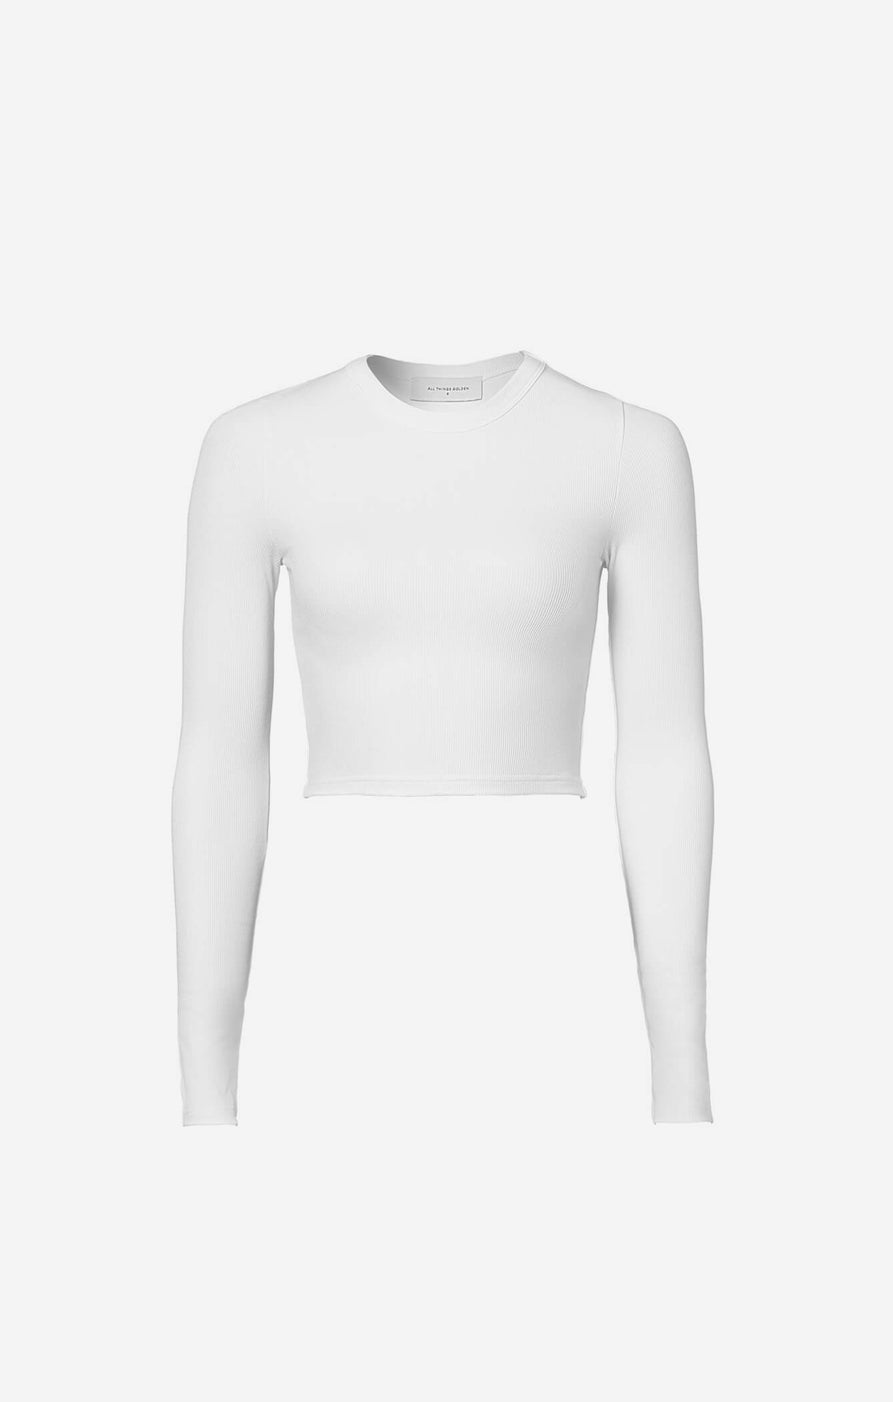 THE LUXE RIB L/S CROP - WHITE – All Things Golden